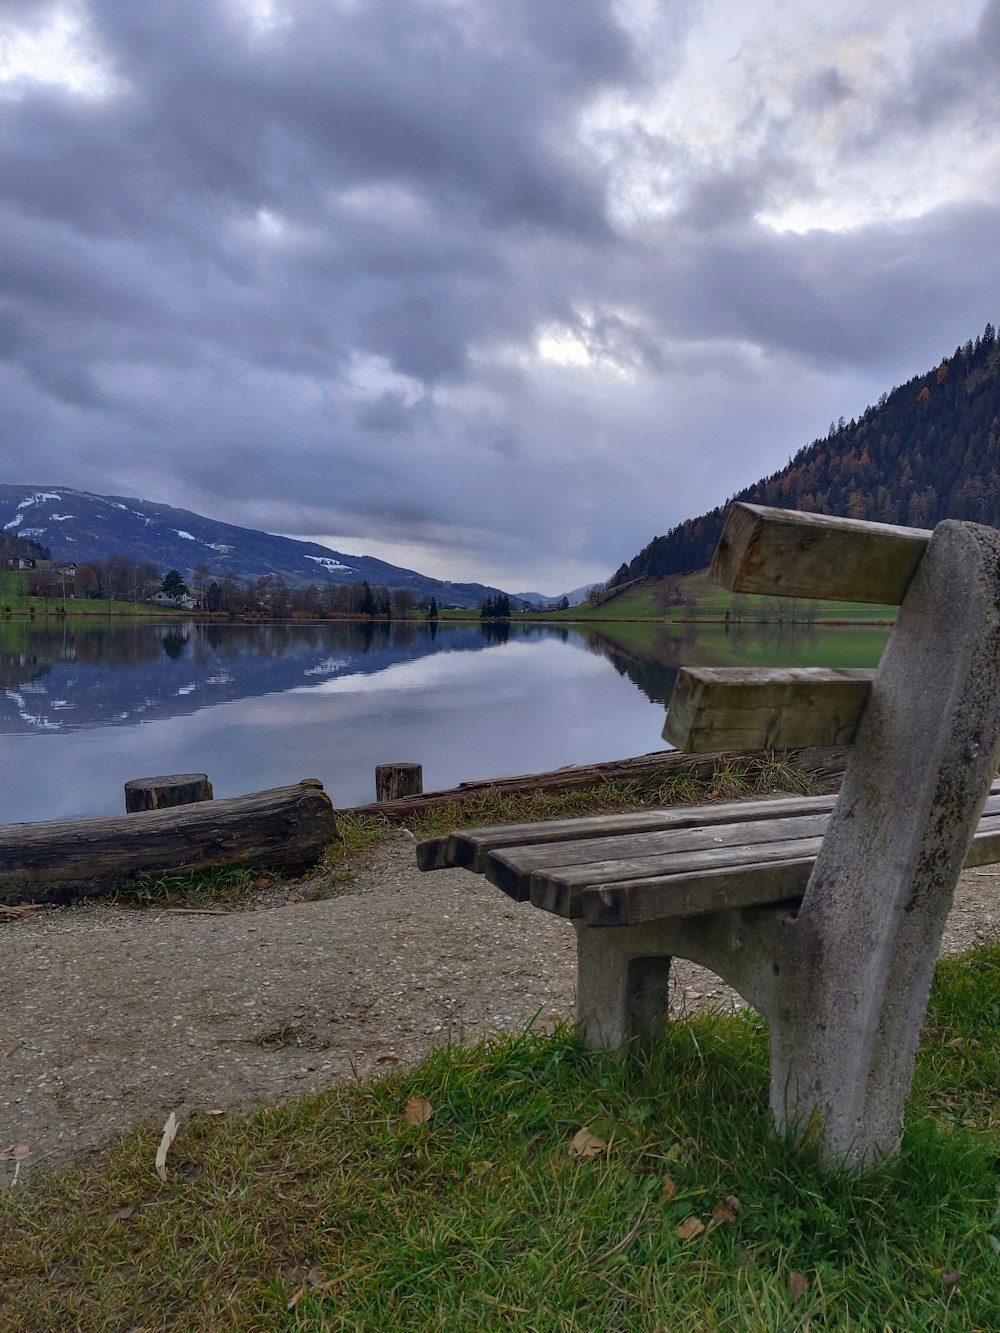 a wooden bench sitting next to a lake under a cloudy sky